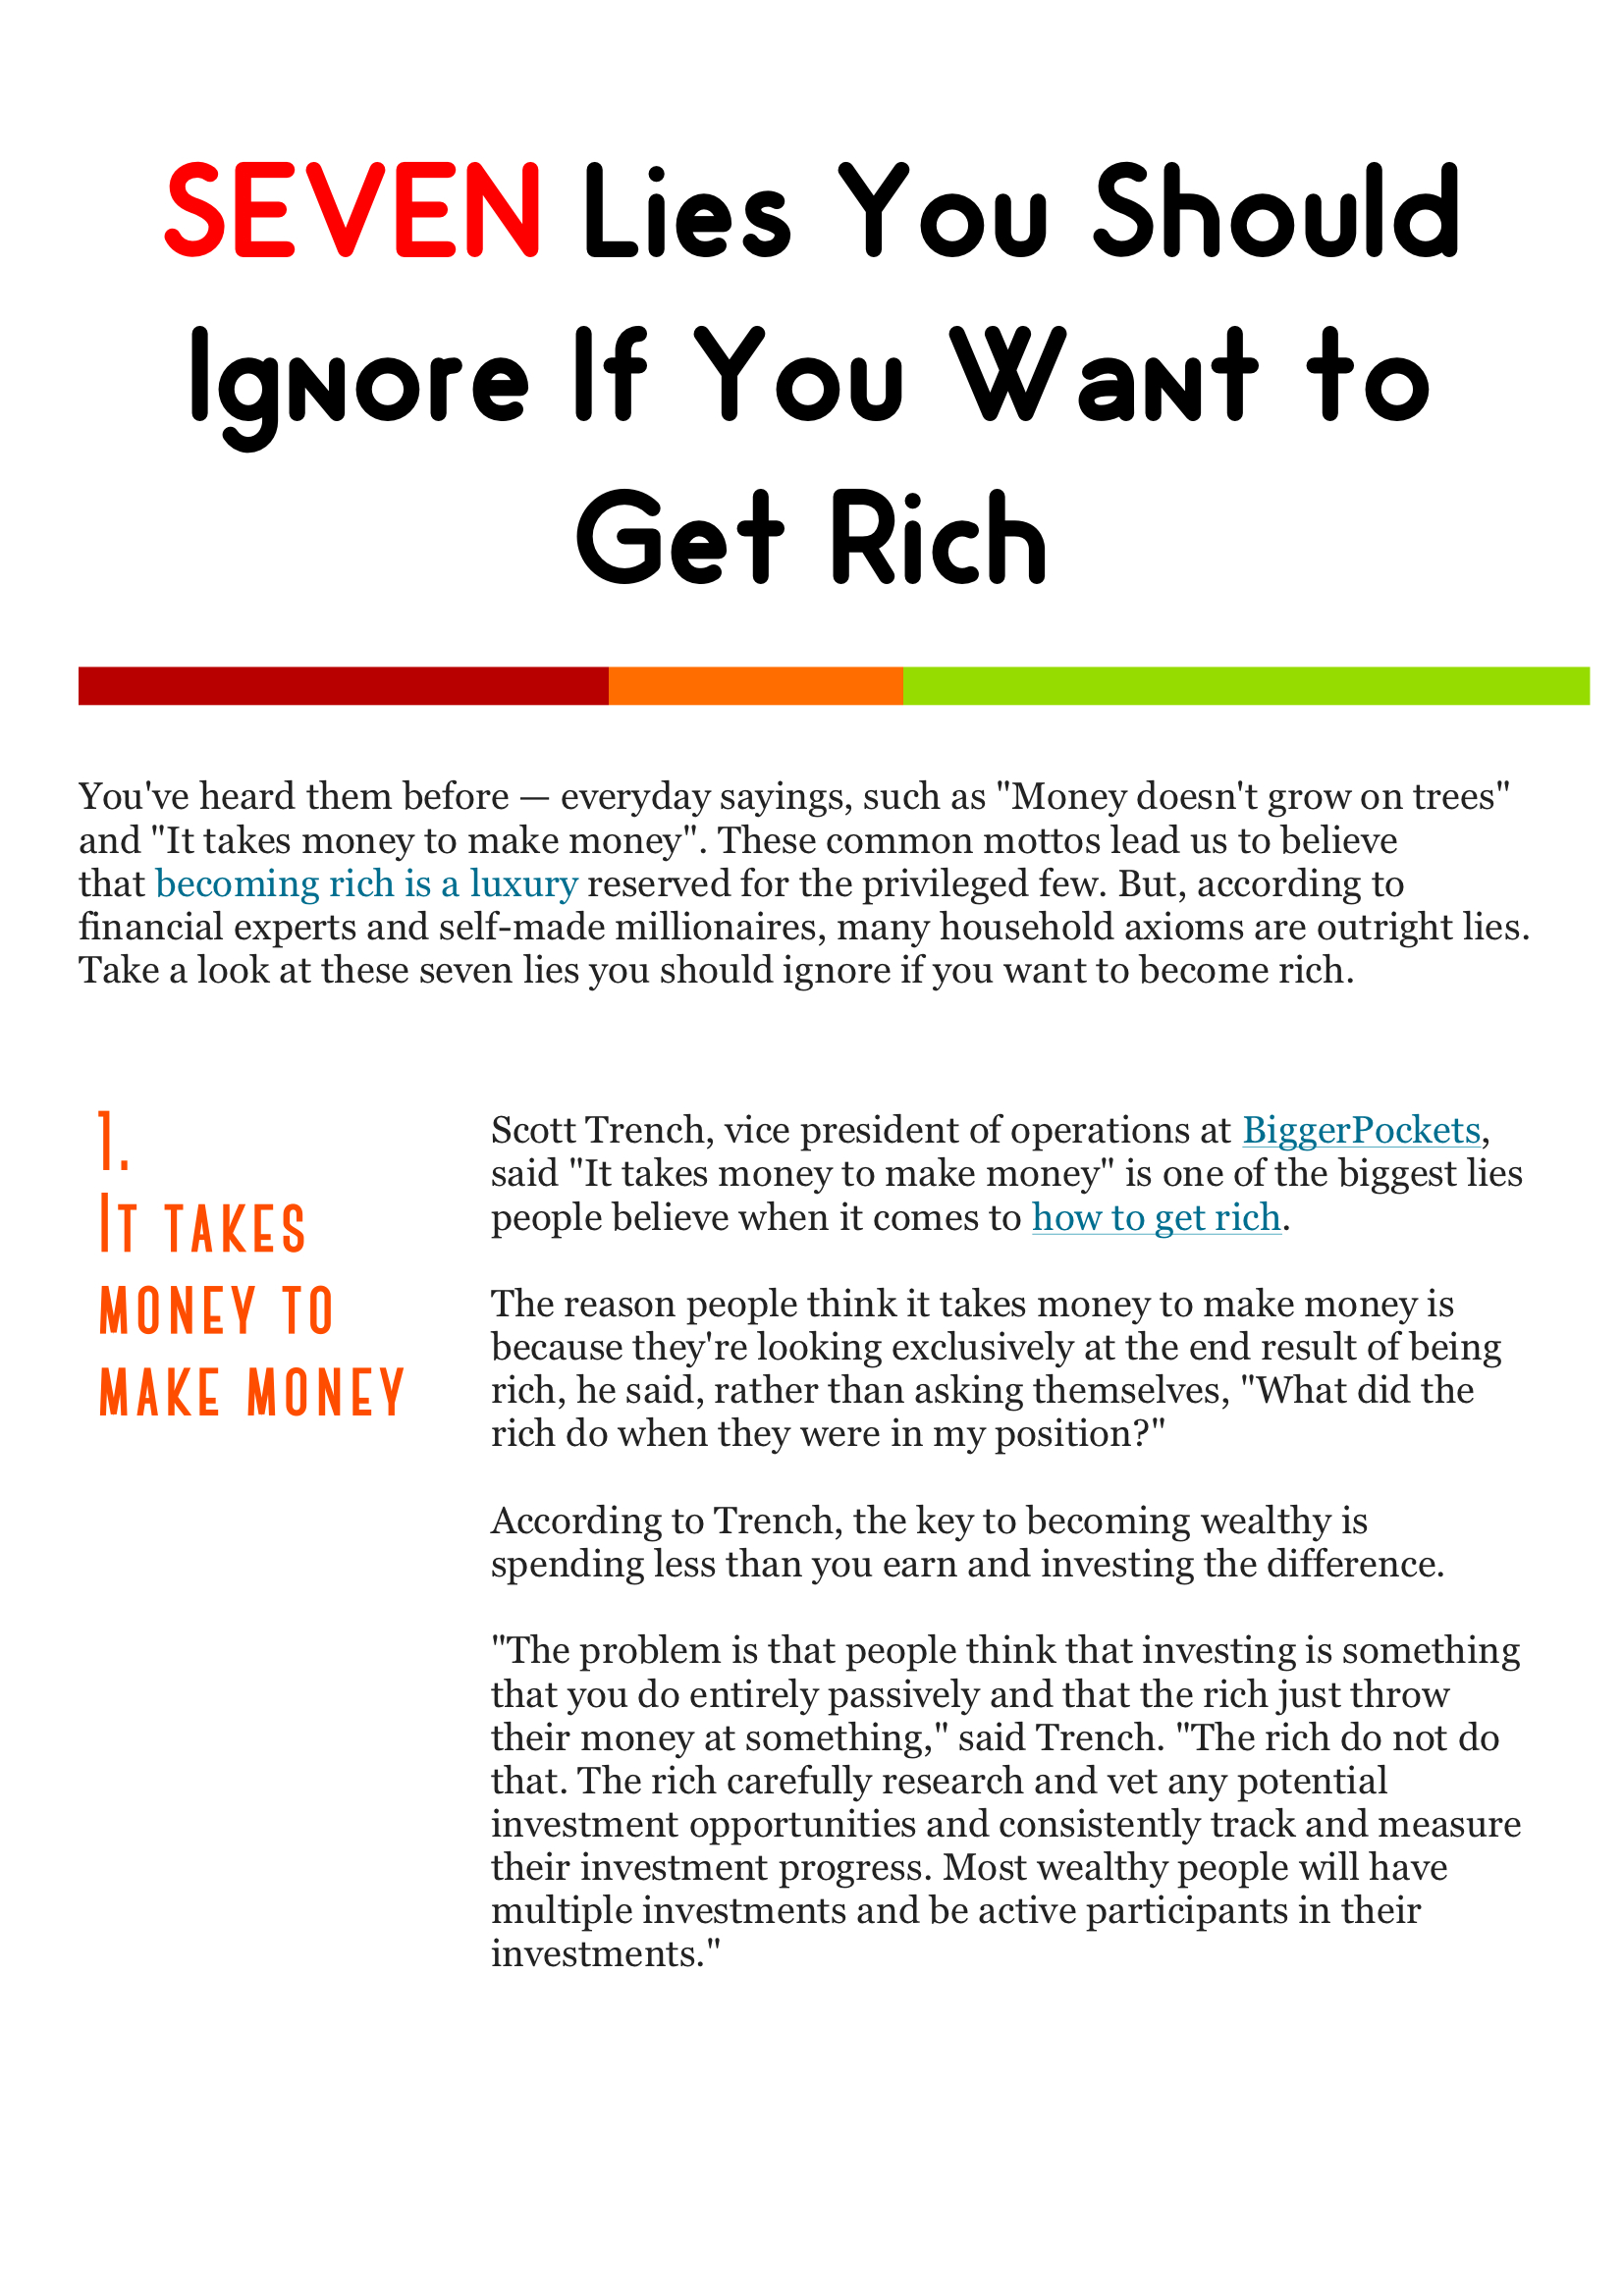 7 Lies You Should Ignore If You Want to Get Rich